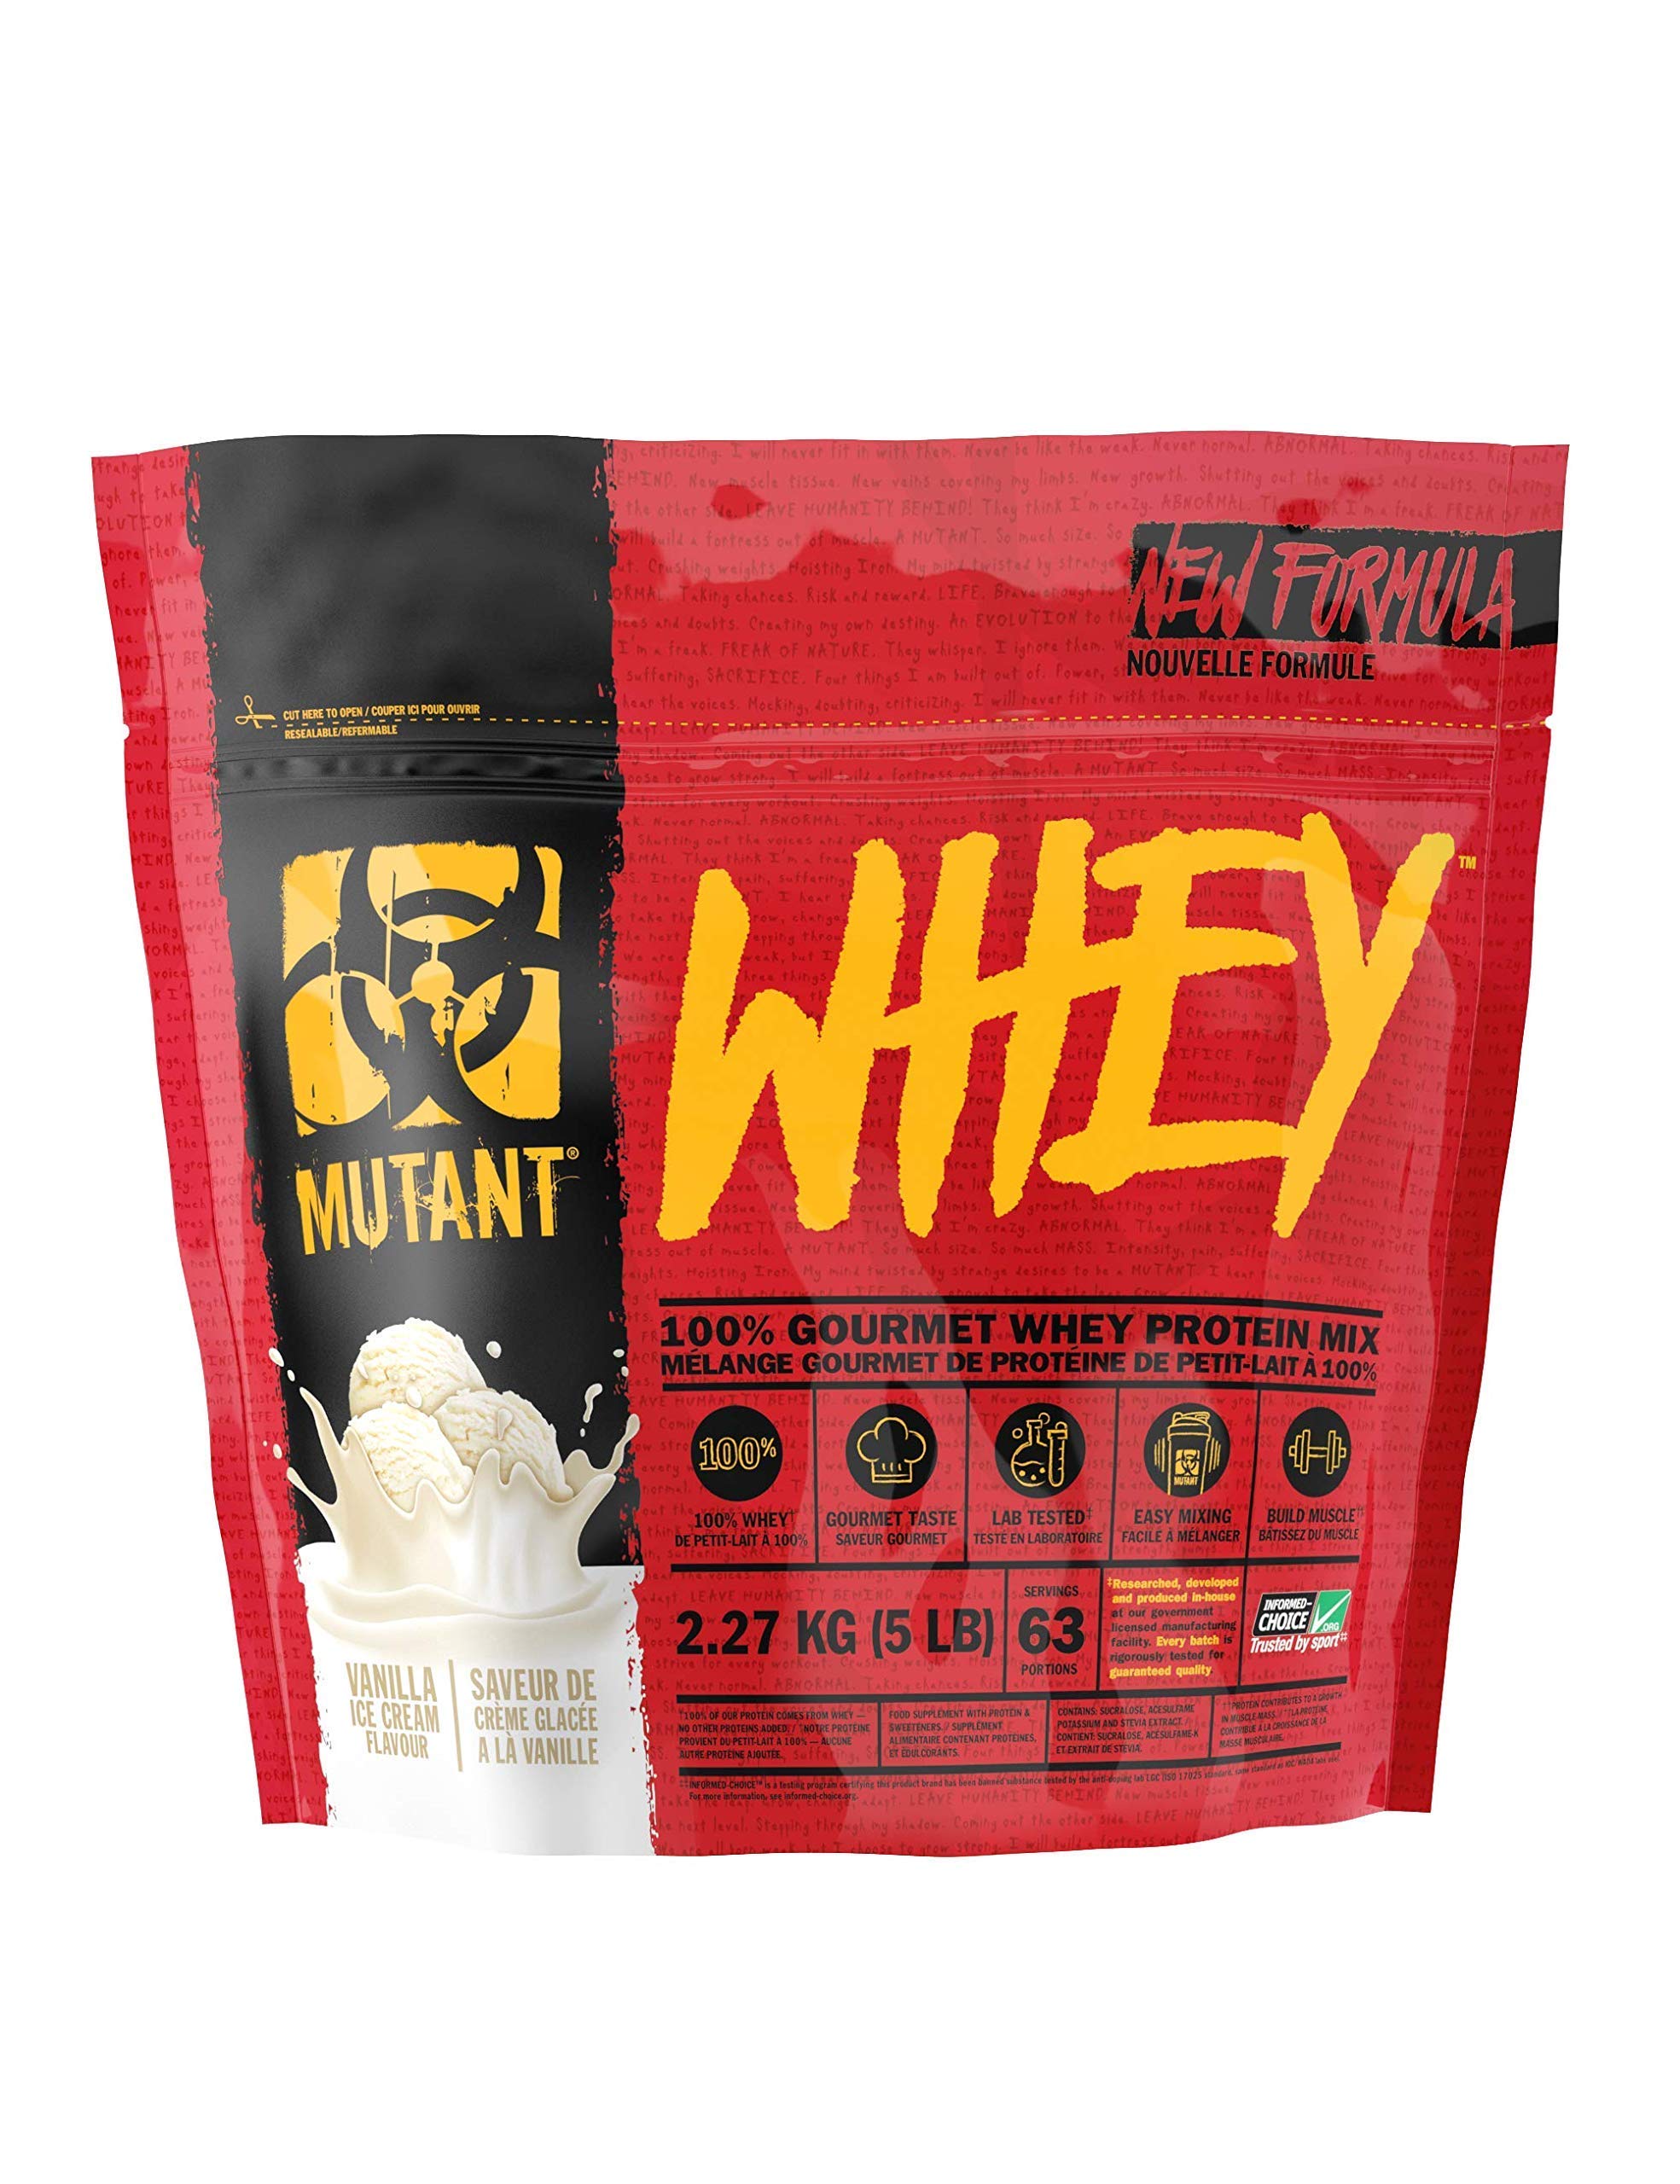 100% Whey Hydro Isolate Zero 750 g - Développement Musculaire